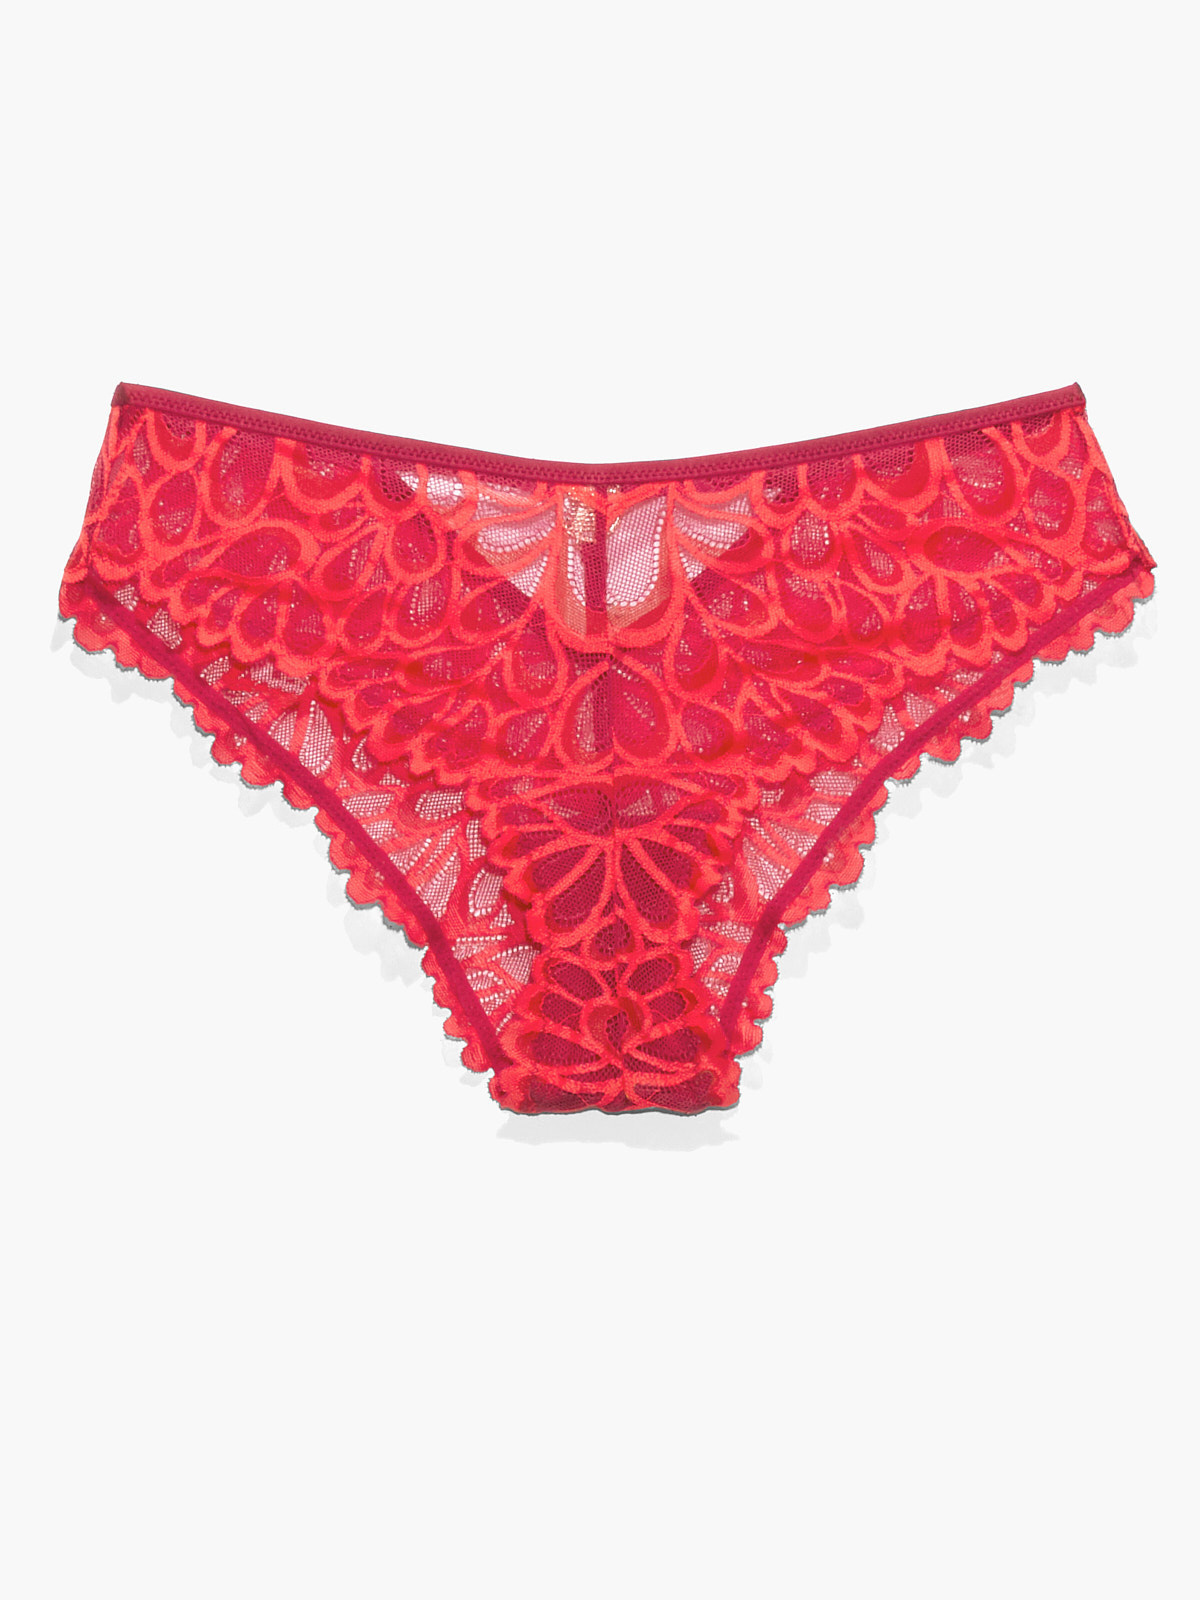 Savage Not Sorry Lace Cheeky Panty in Pink & Red